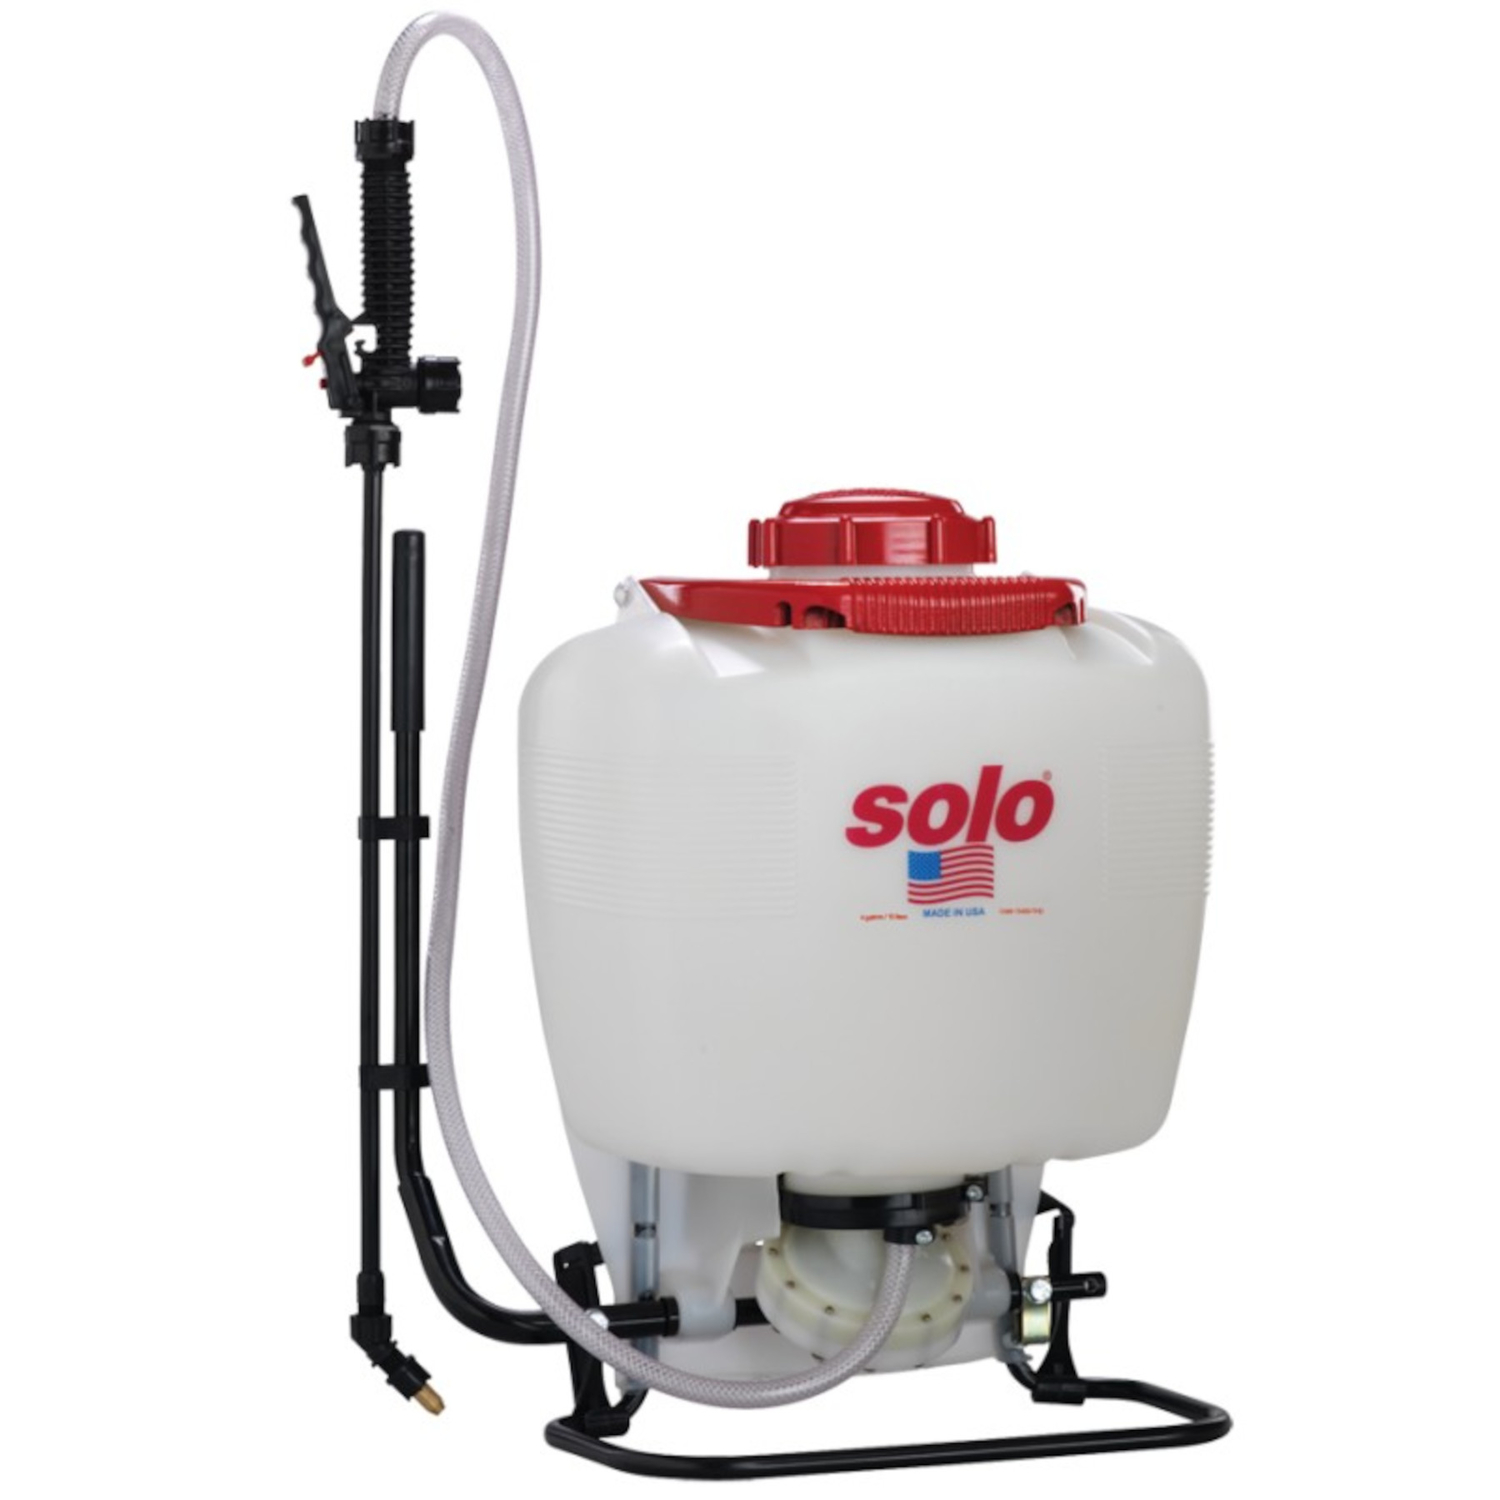 Photo 1 of Solo 4 gal Backpack Sprayer